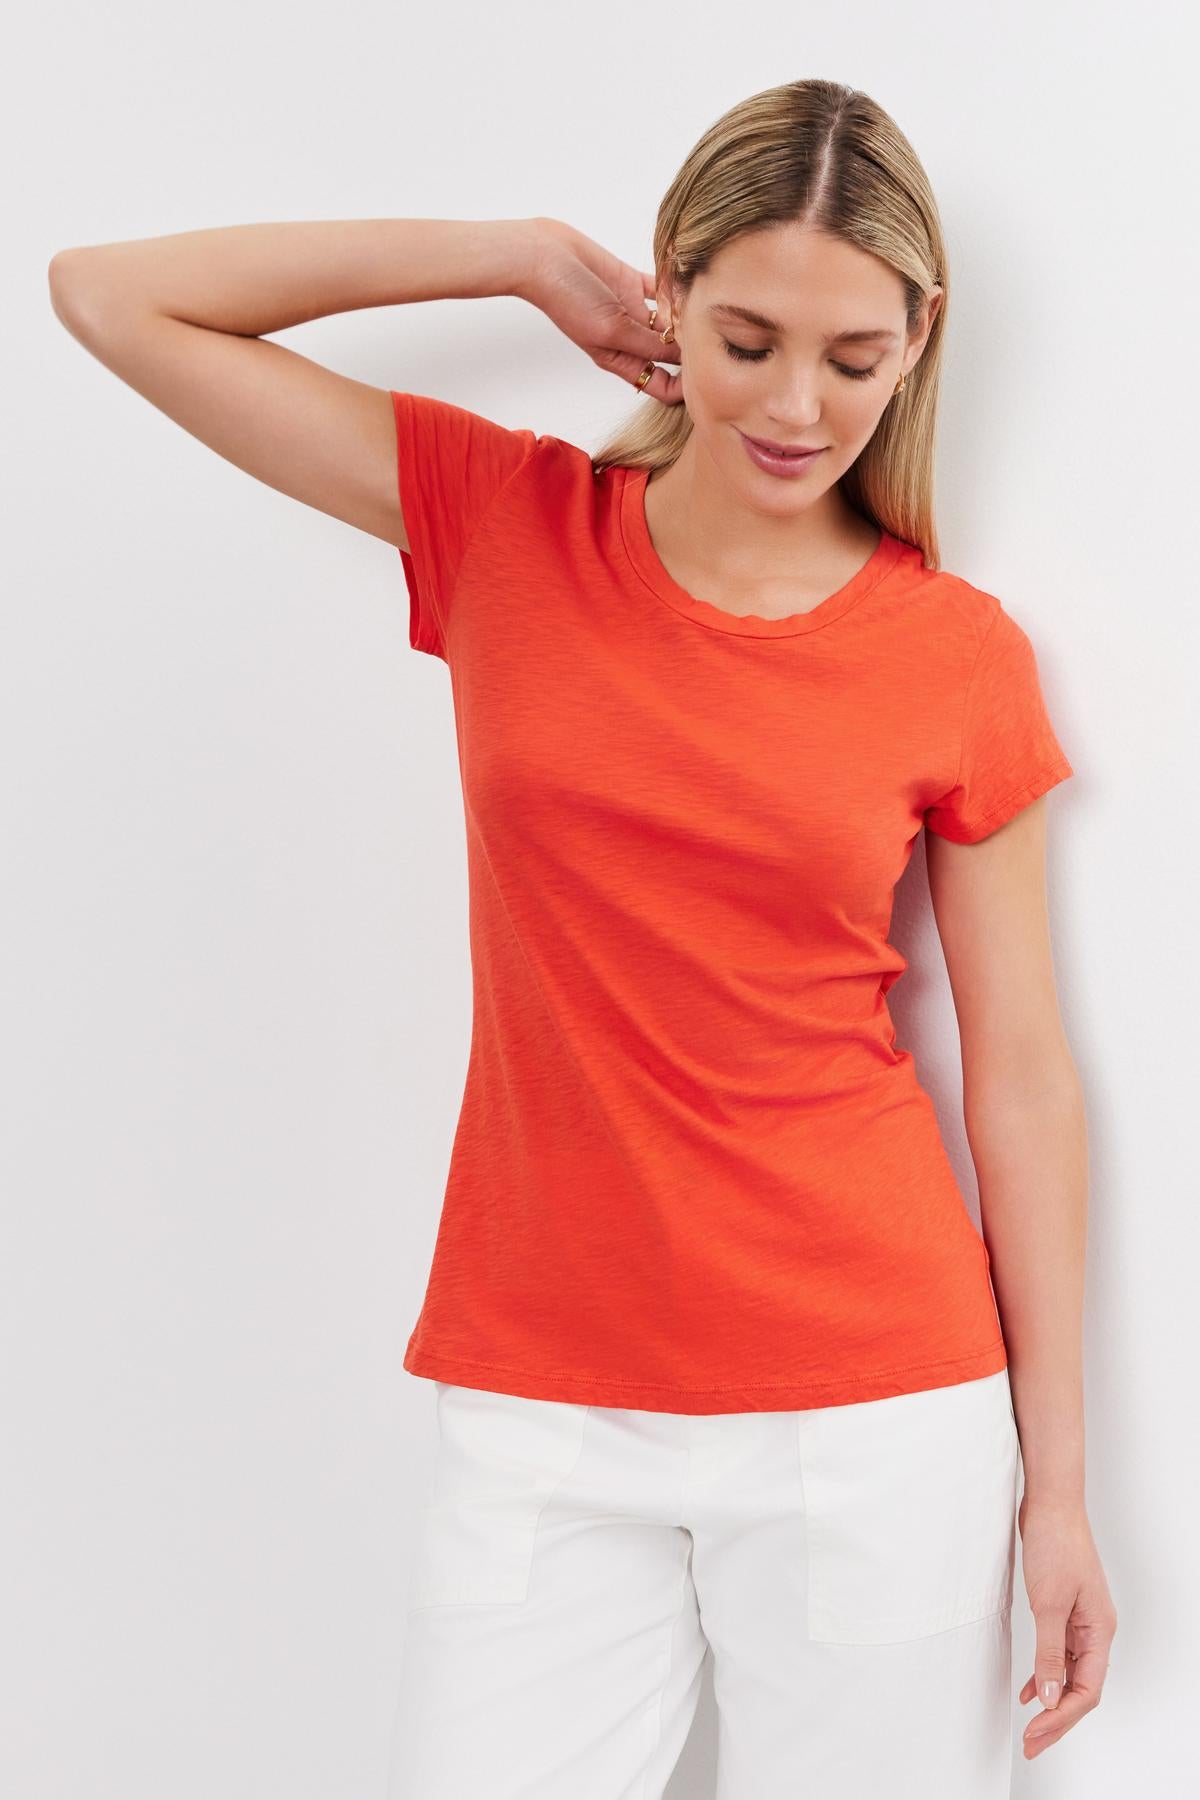 A young woman wearing a bright orange Velvet by Graham & Spencer ODELIA COTTON SLUB CREW NECK TEE and white pants, posing with her hand on her neck against a white background.-36910072594625